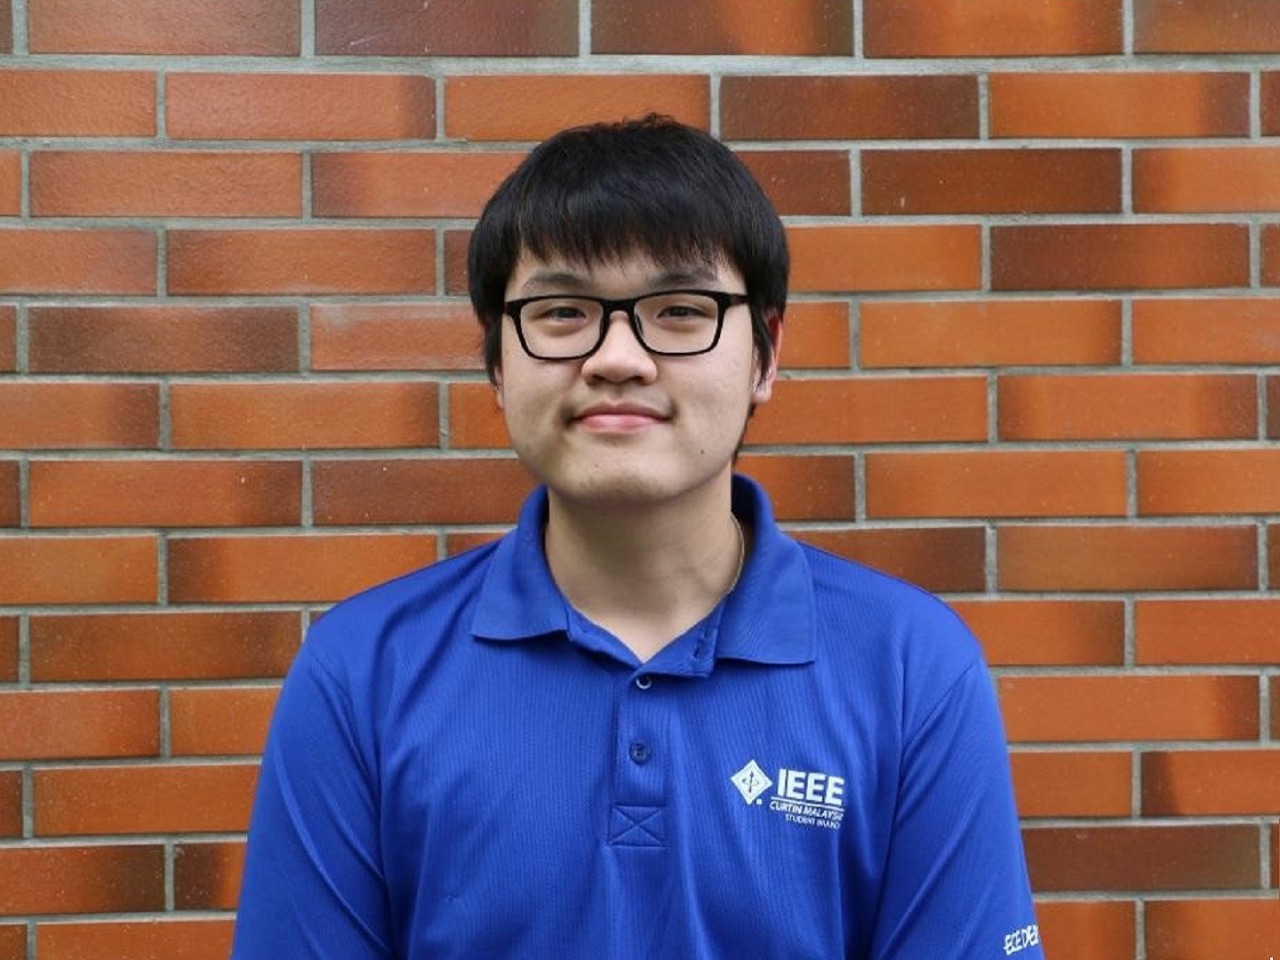 “I joined Curtin Malaysia as a Foundation in Engineering and Science student in 2018. At that time, I was shy and Introverted and all I cared about was how to get a 4.0 CGPA. However, I made a life-changing decision in my second semester when I...